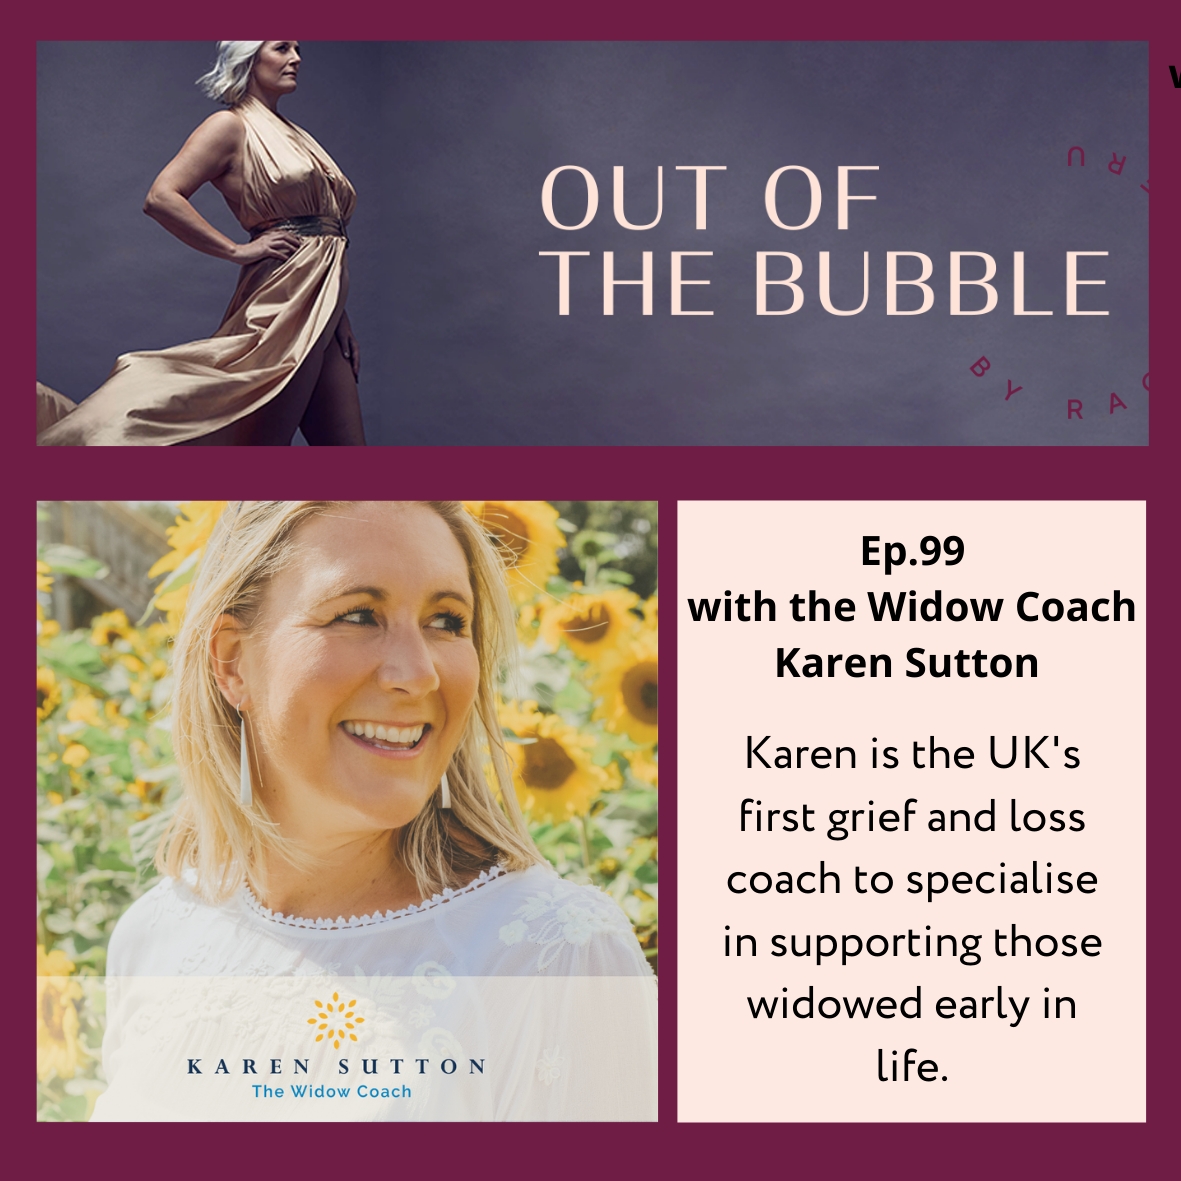 Ep.99 Liberte Free to Be, with Karen Sutton, The Widow Coach